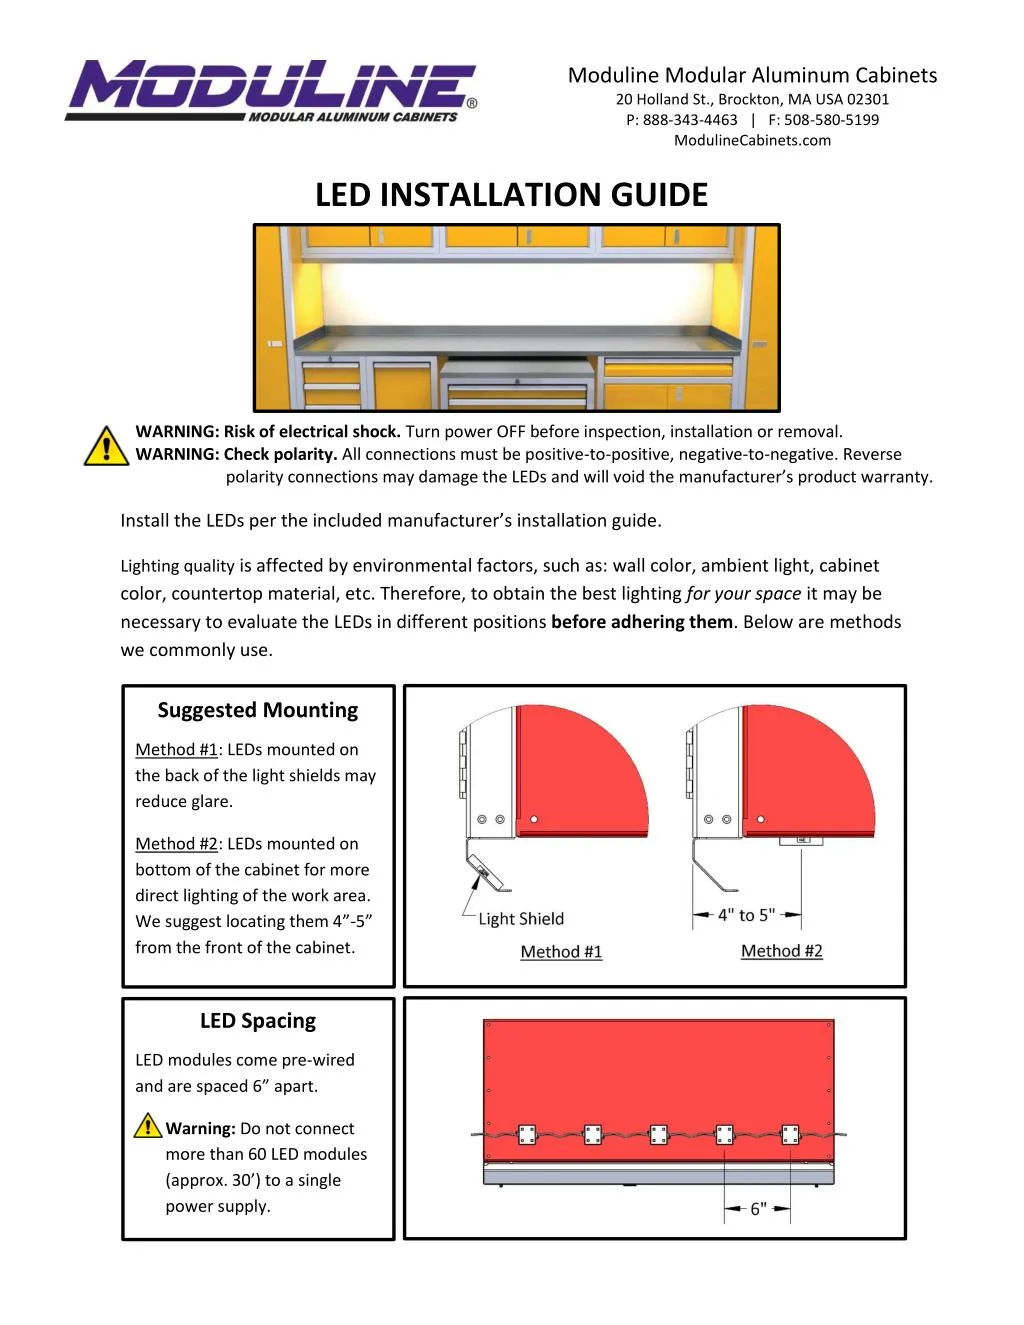 Ppt Led Installation Guide For Aluminum Storage Cabinets